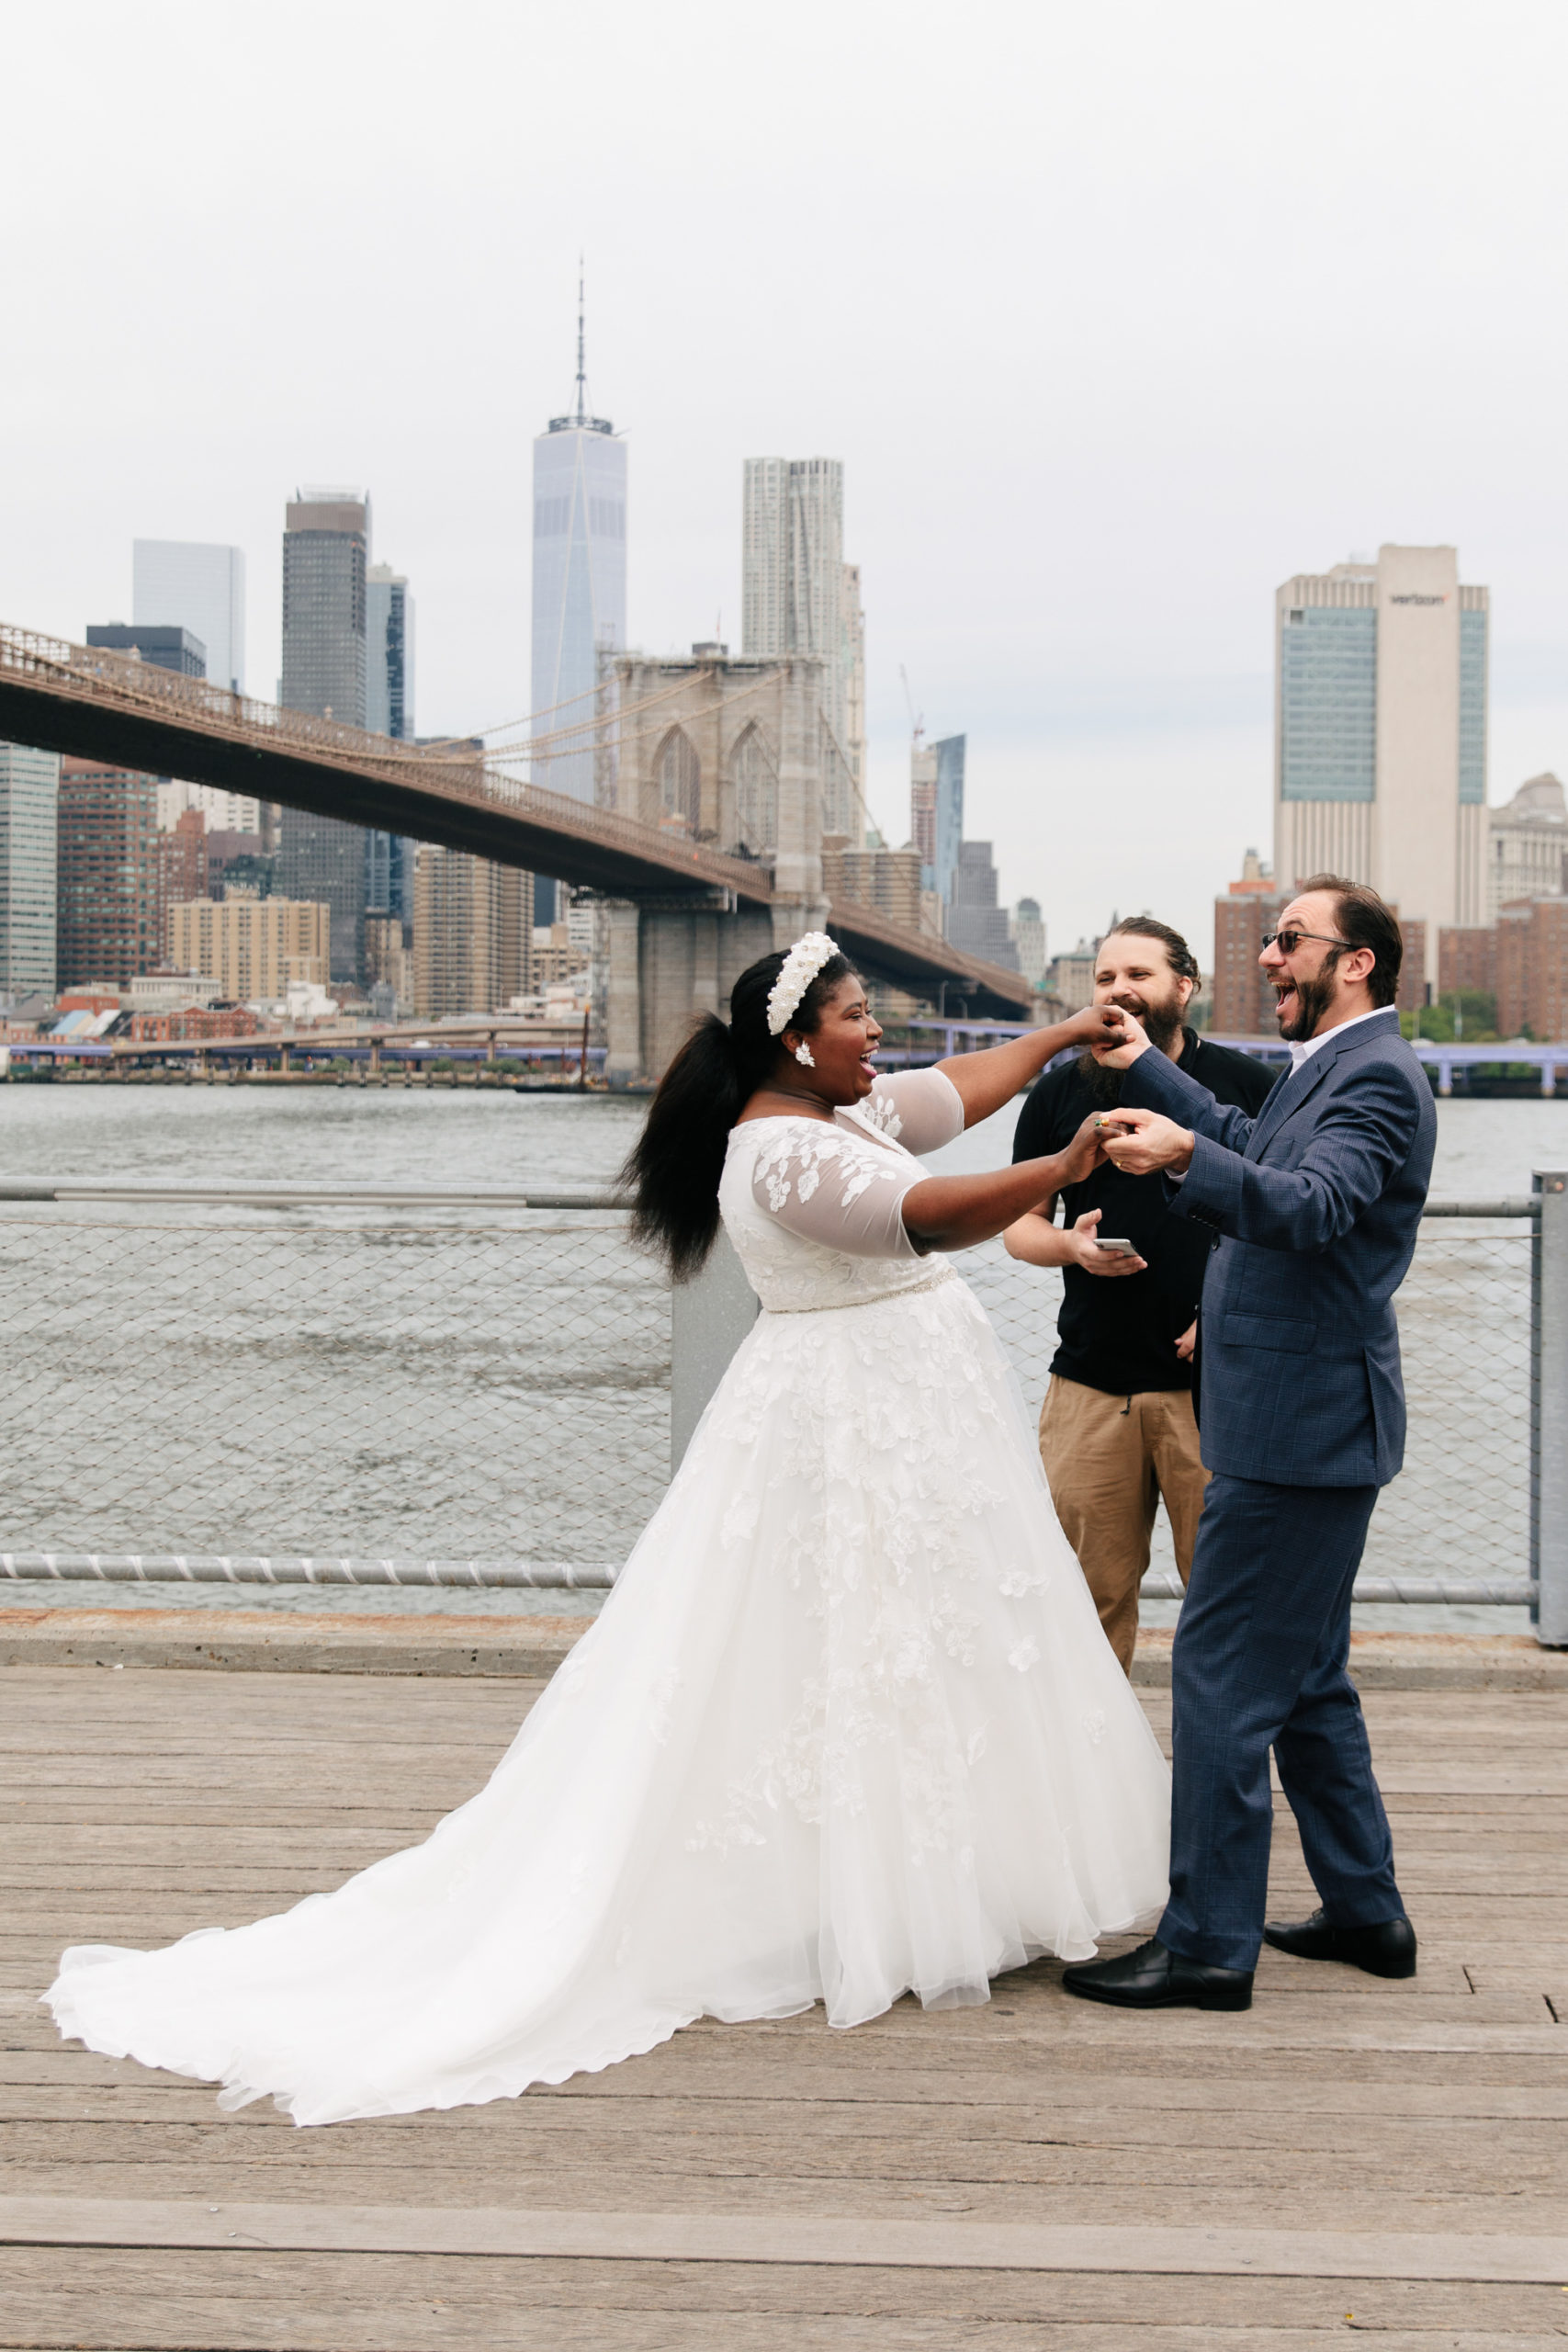 How to get married in Dumbo Brooklyn